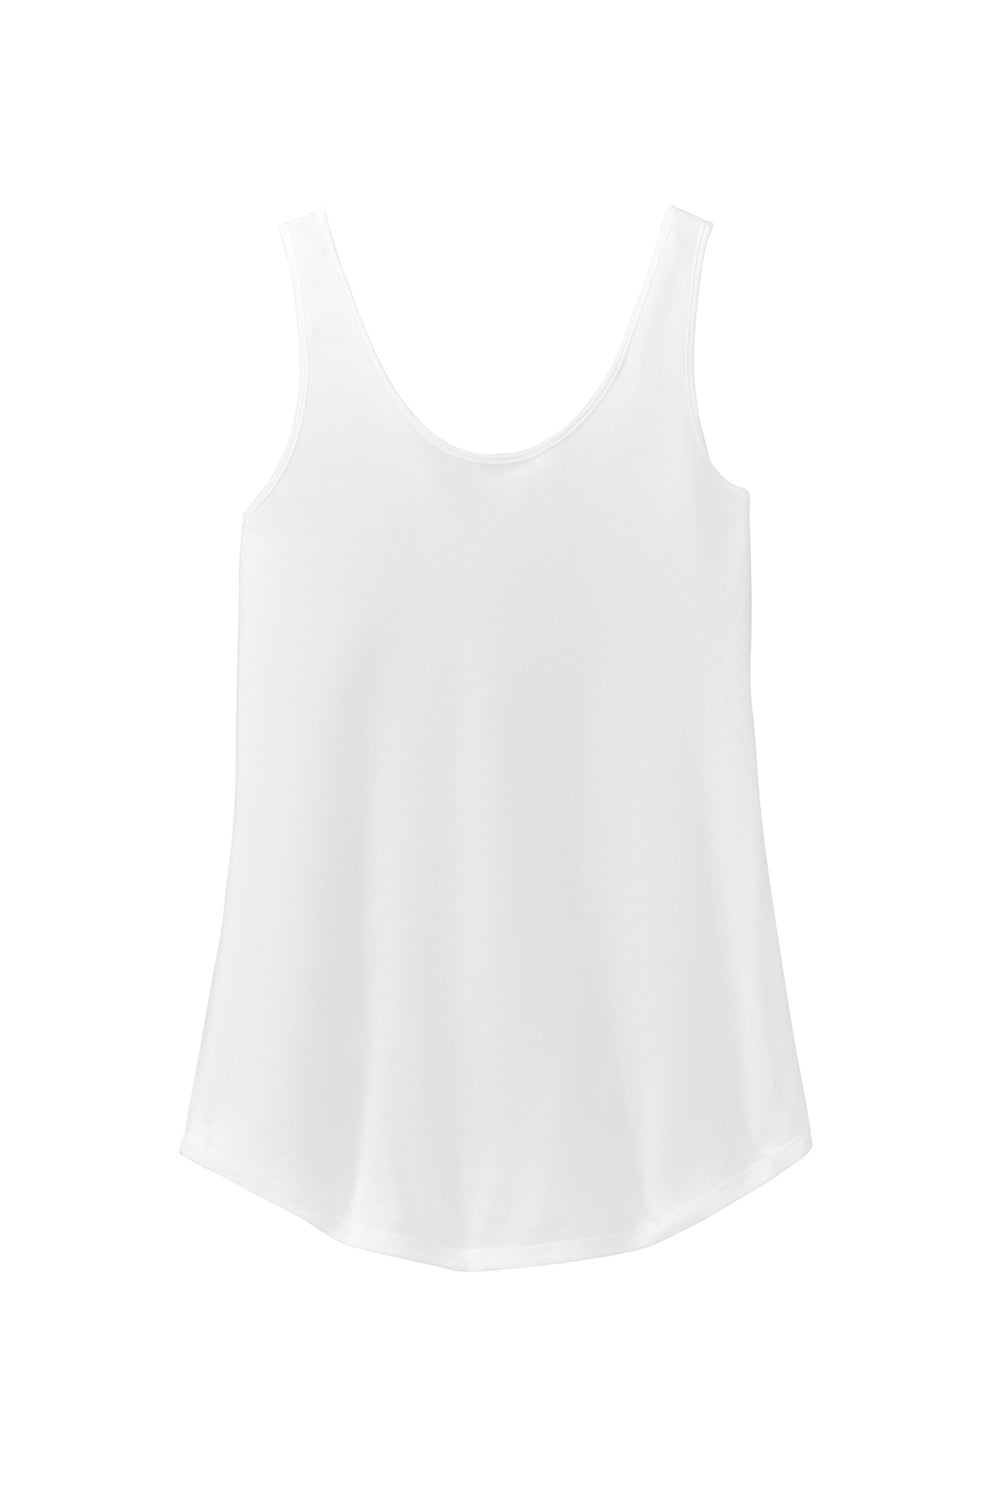 District DT151 Womens Perfect Tri Relaxed Tank Top White Flat Front